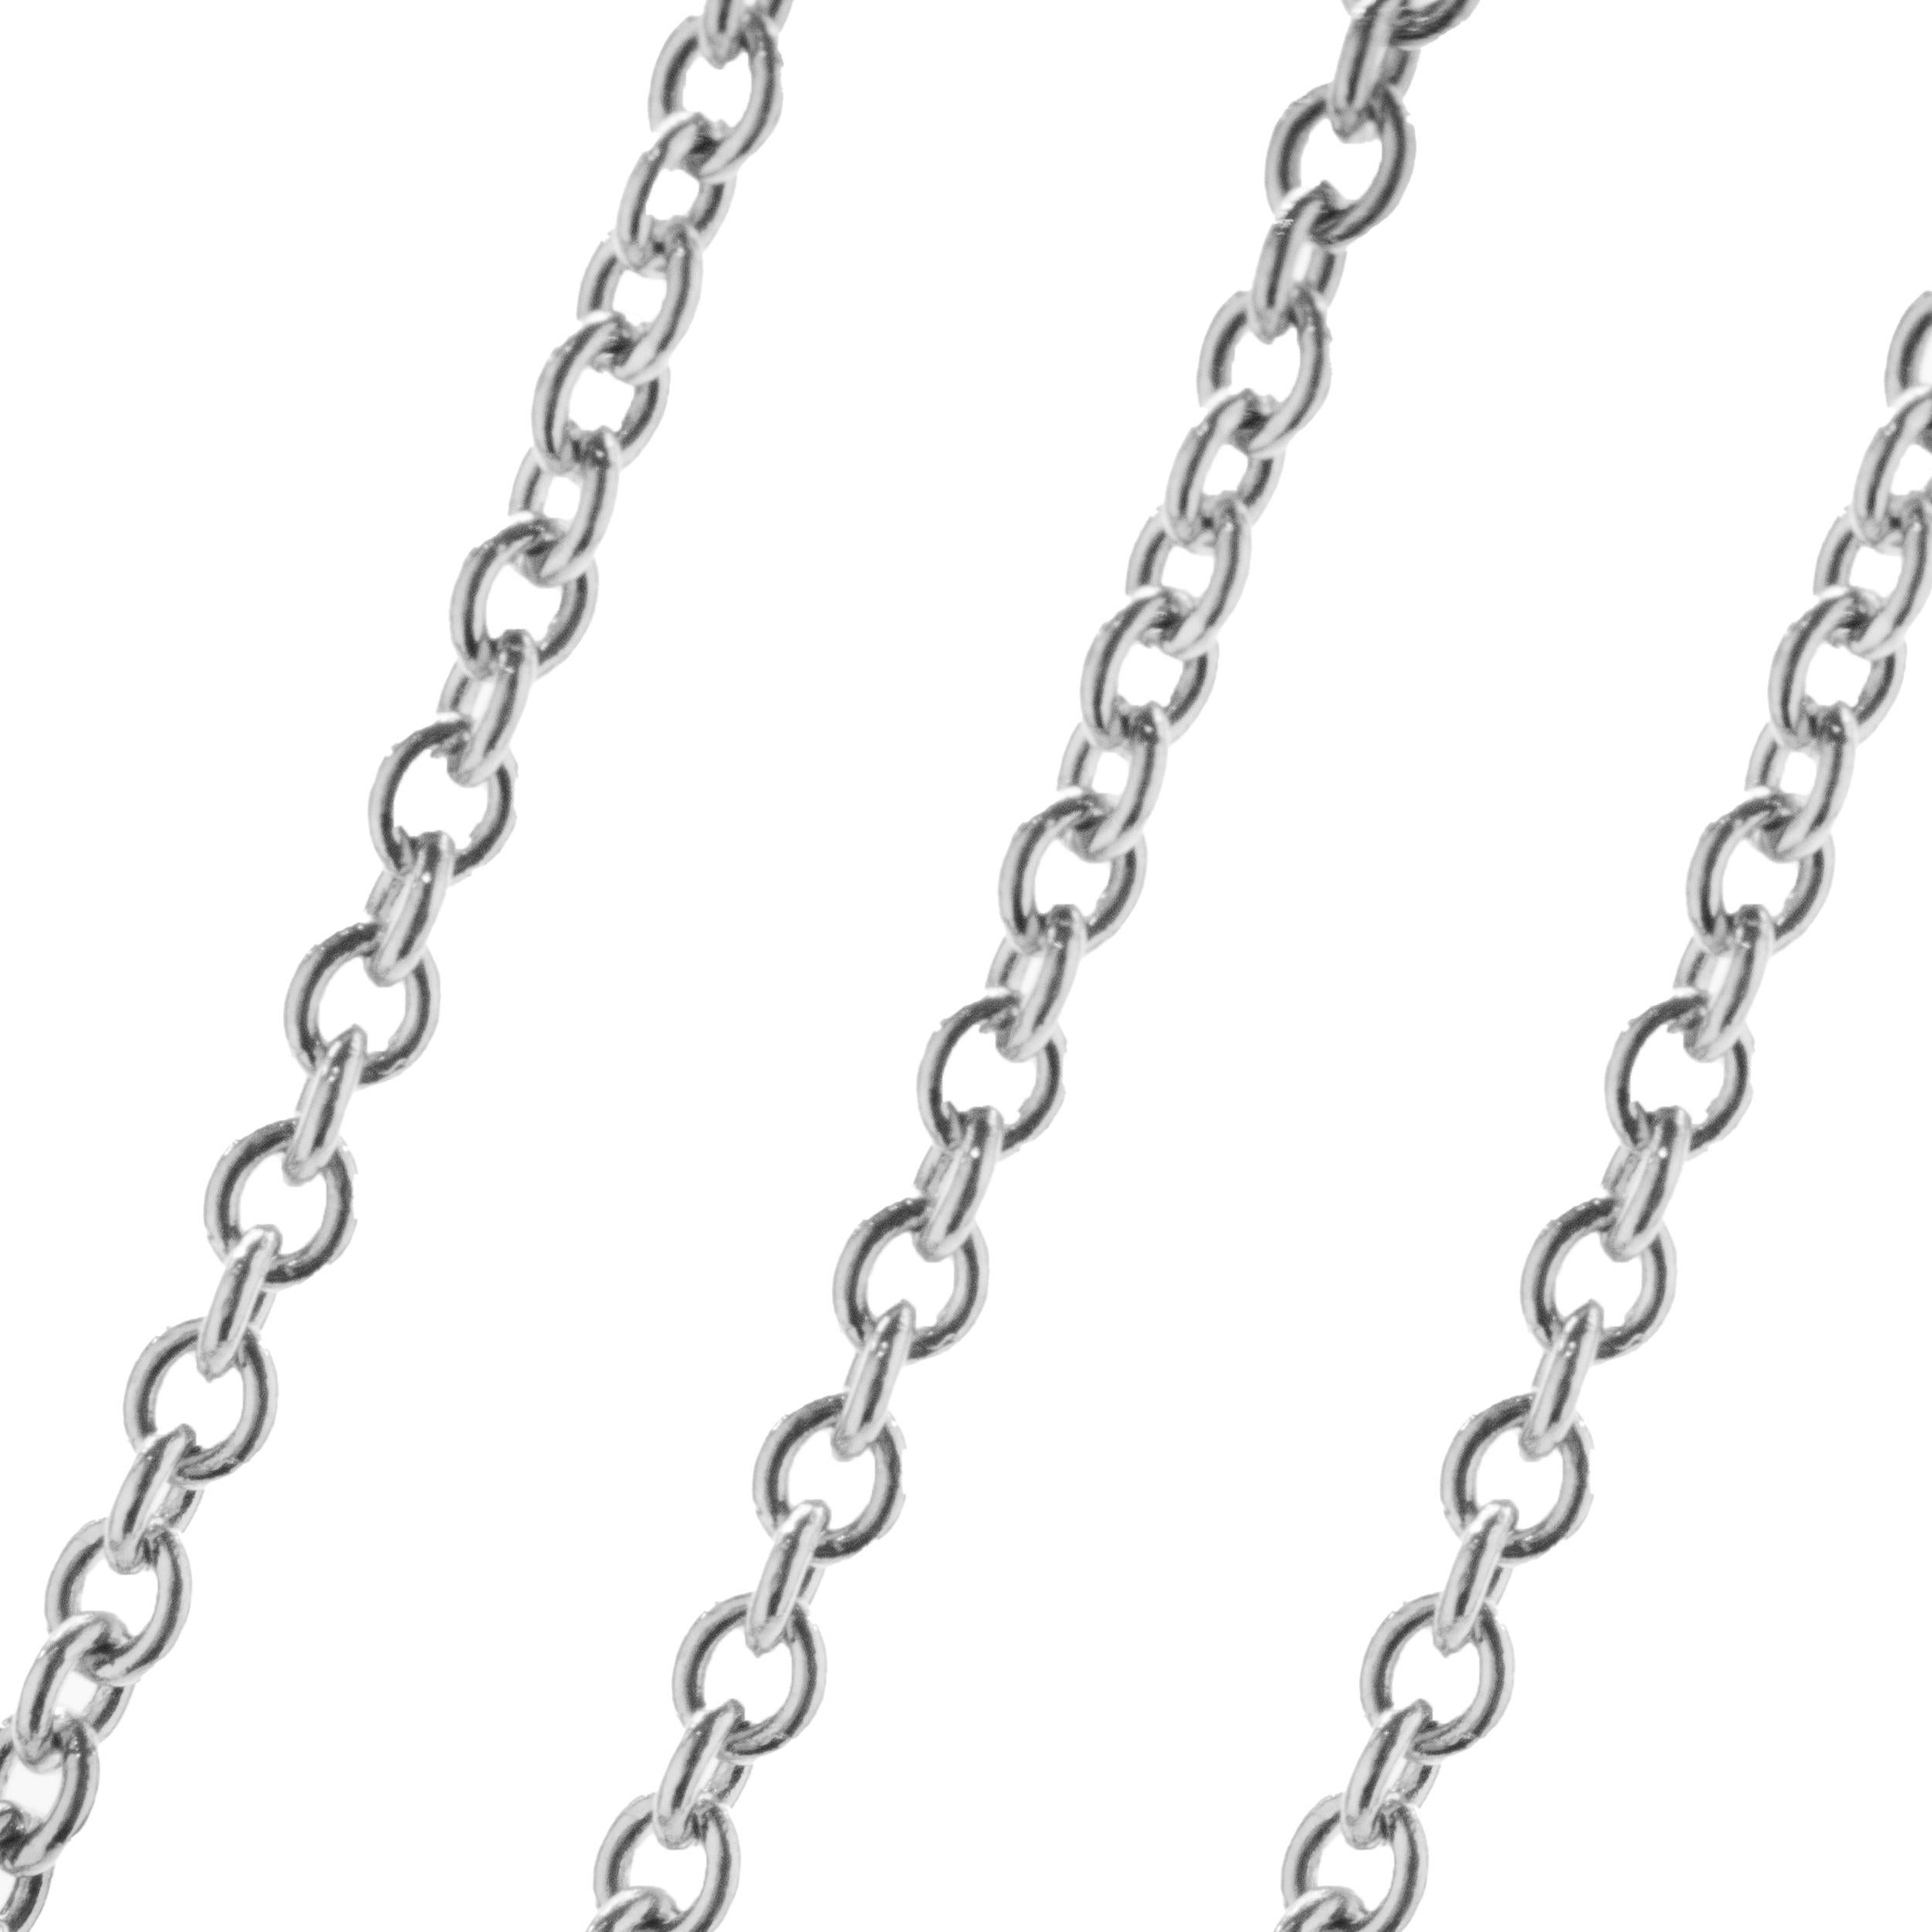 Designer: Tiffany & Co.
Material: Sterling Silver
Dimensions: necklace measures 18-inches in length
Weight: 4.82 grams
